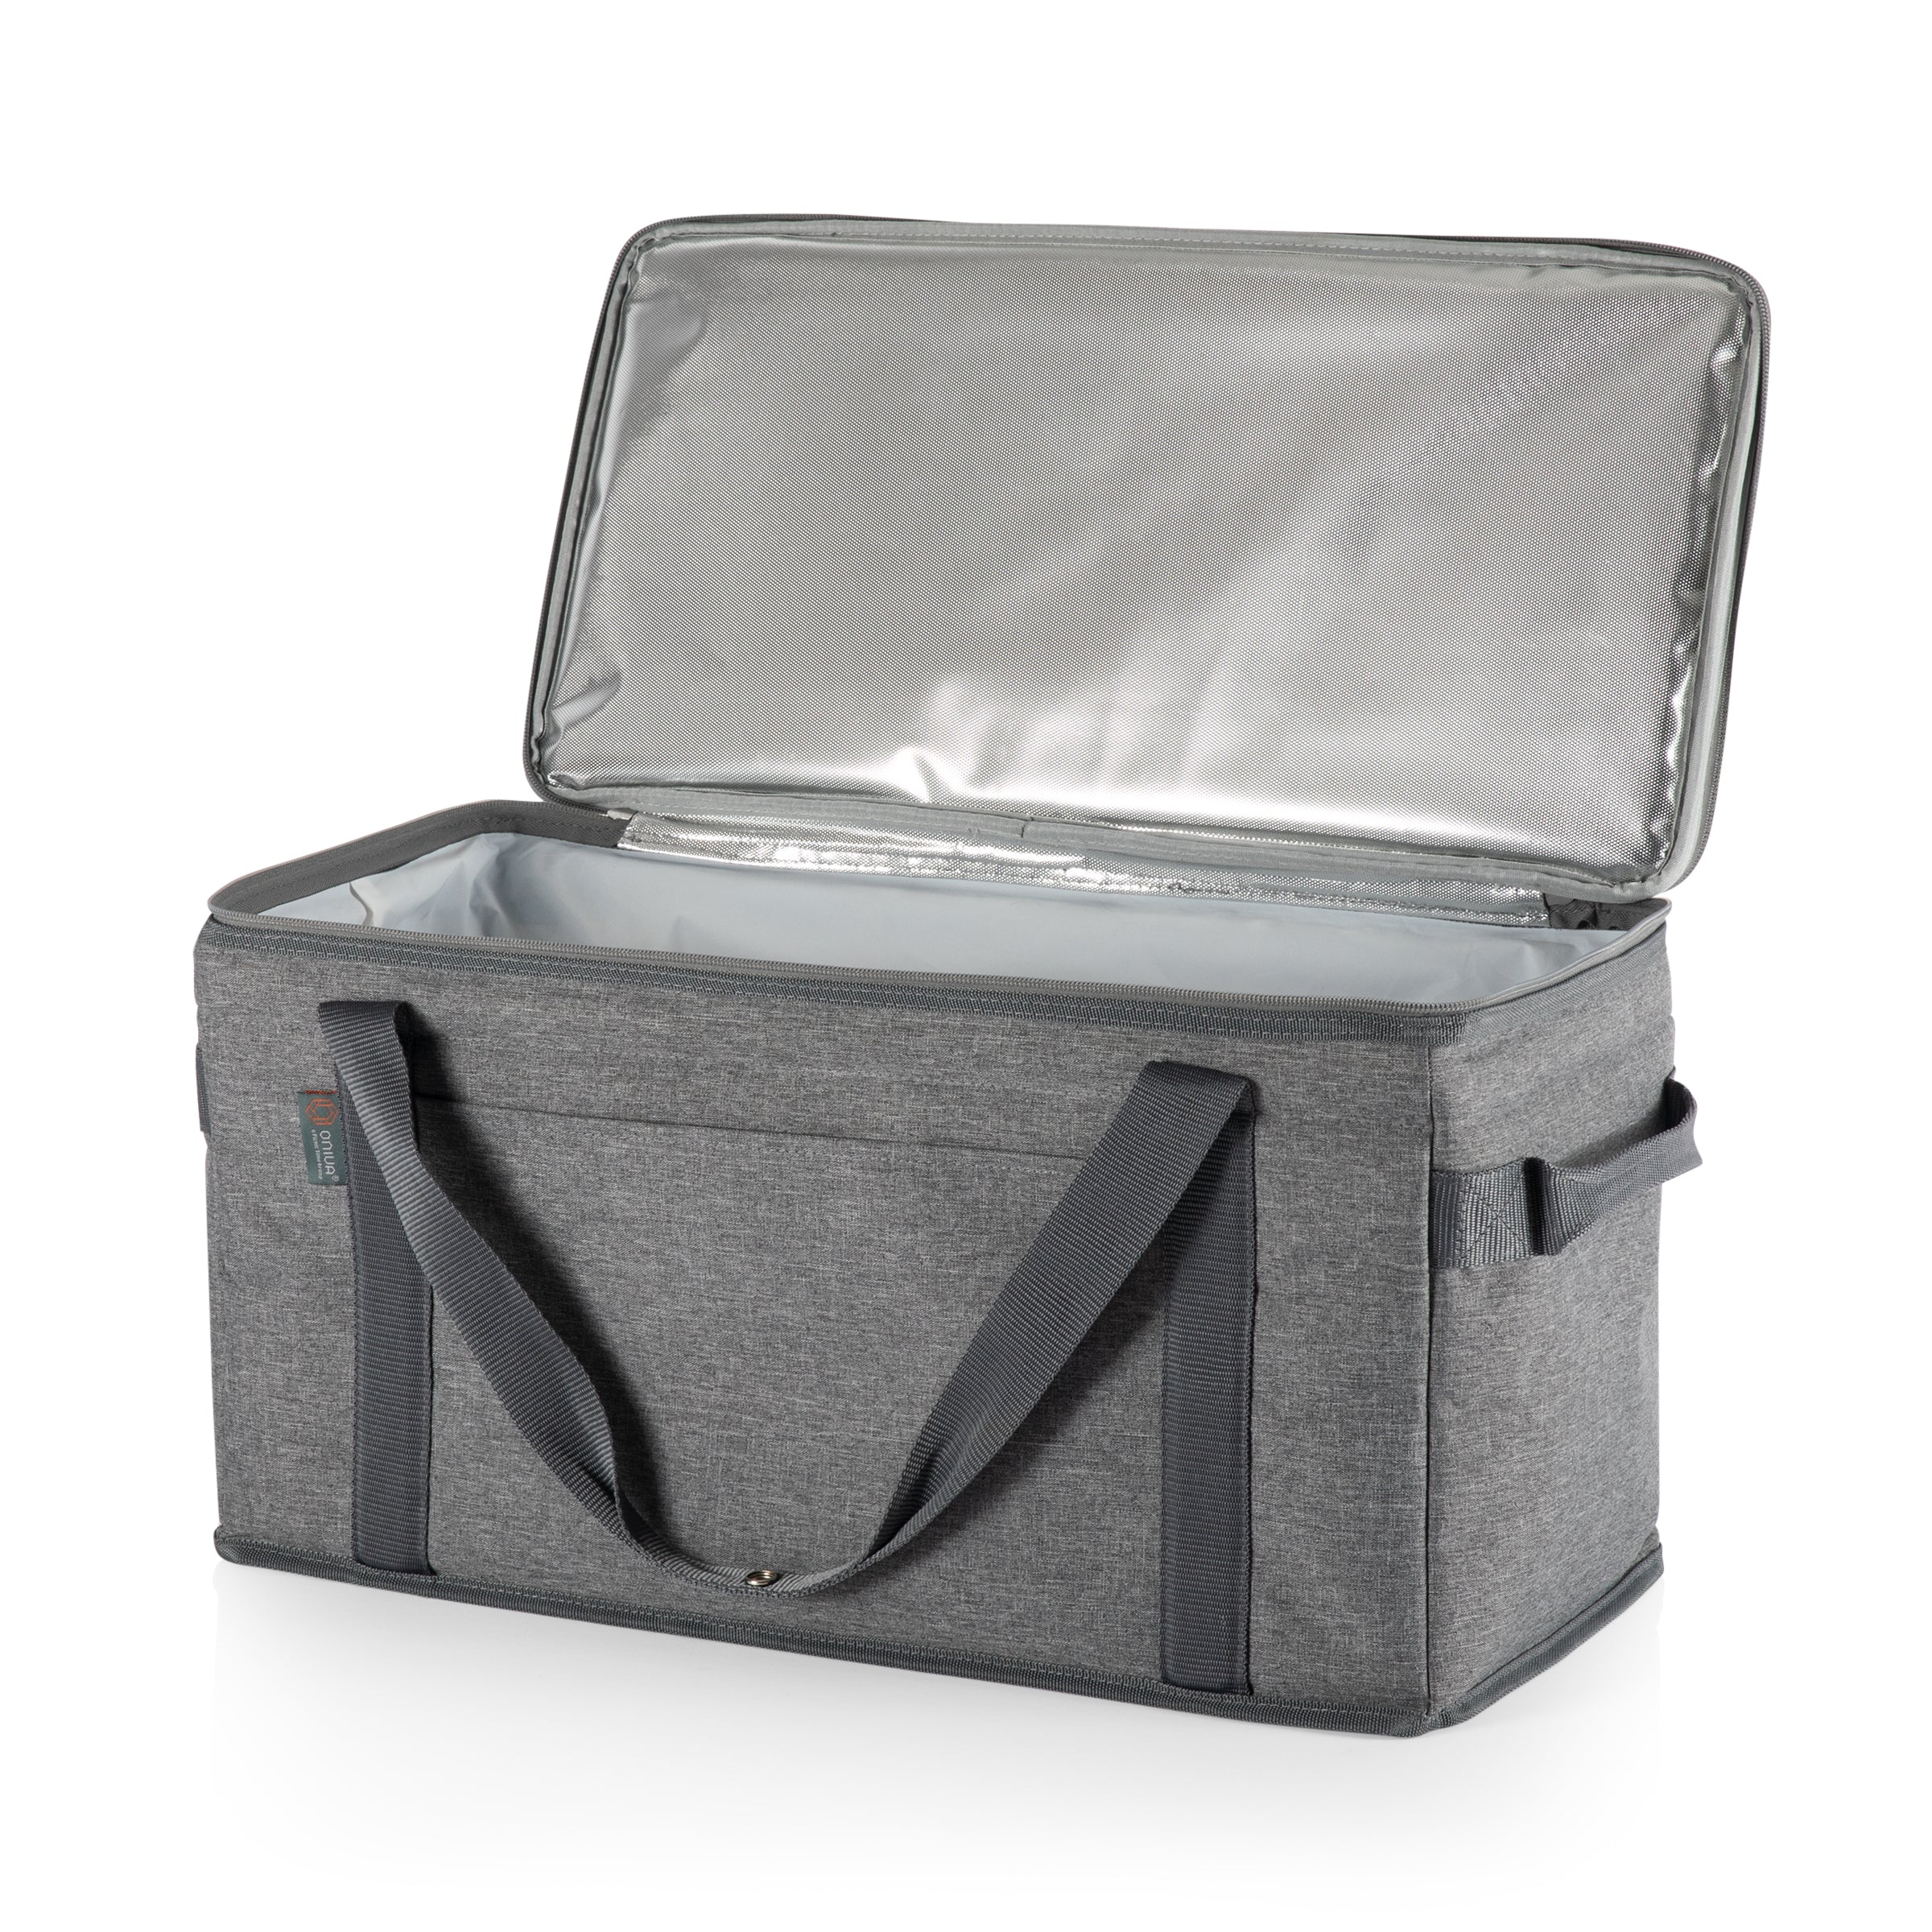 New York Yankees - 64 Can Collapsible Cooler